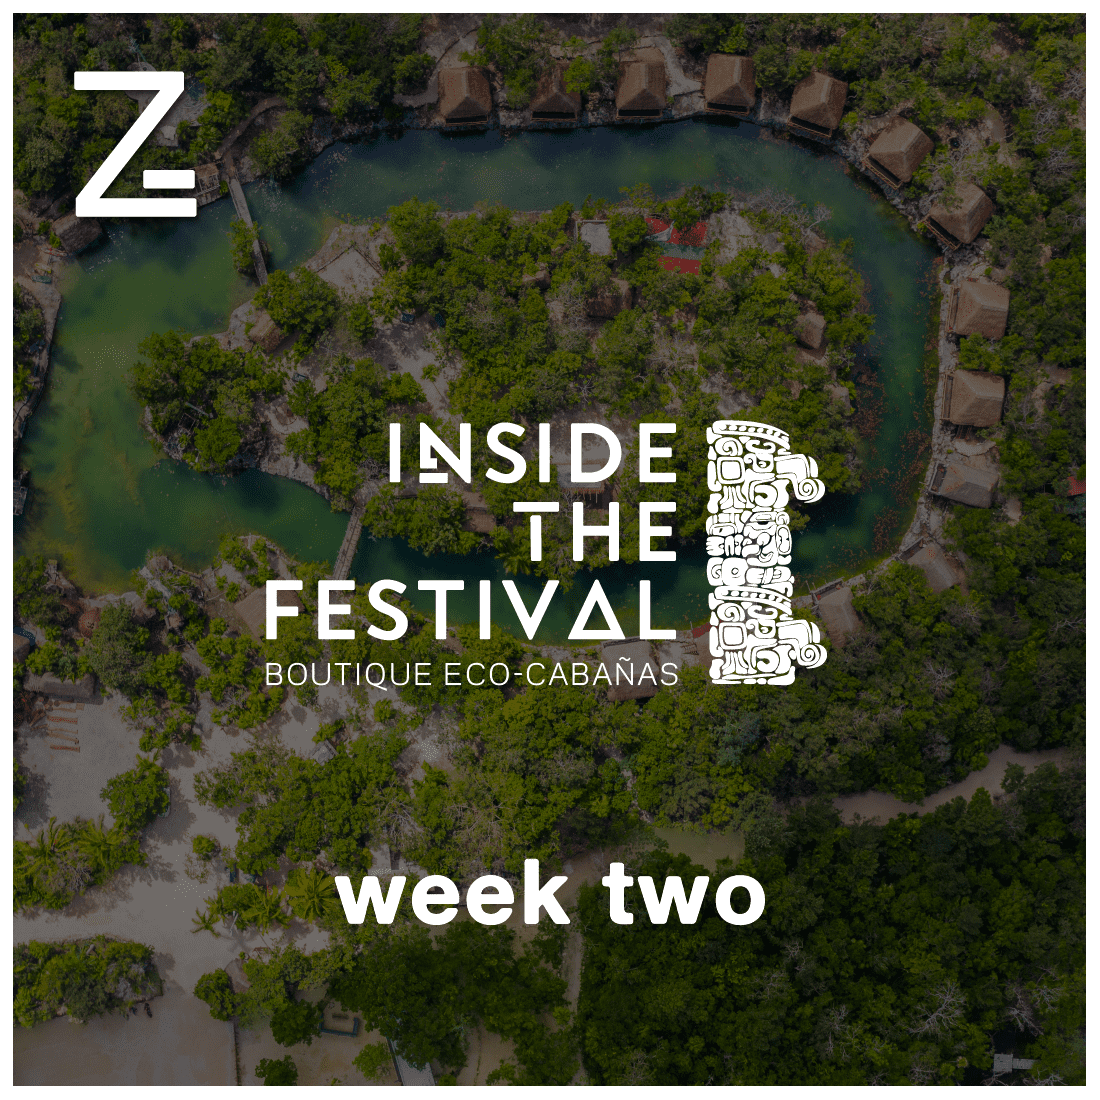 INSIDE THE FESTIVAL: 7 nights at Cabin + Backstage Tickets - Week 2